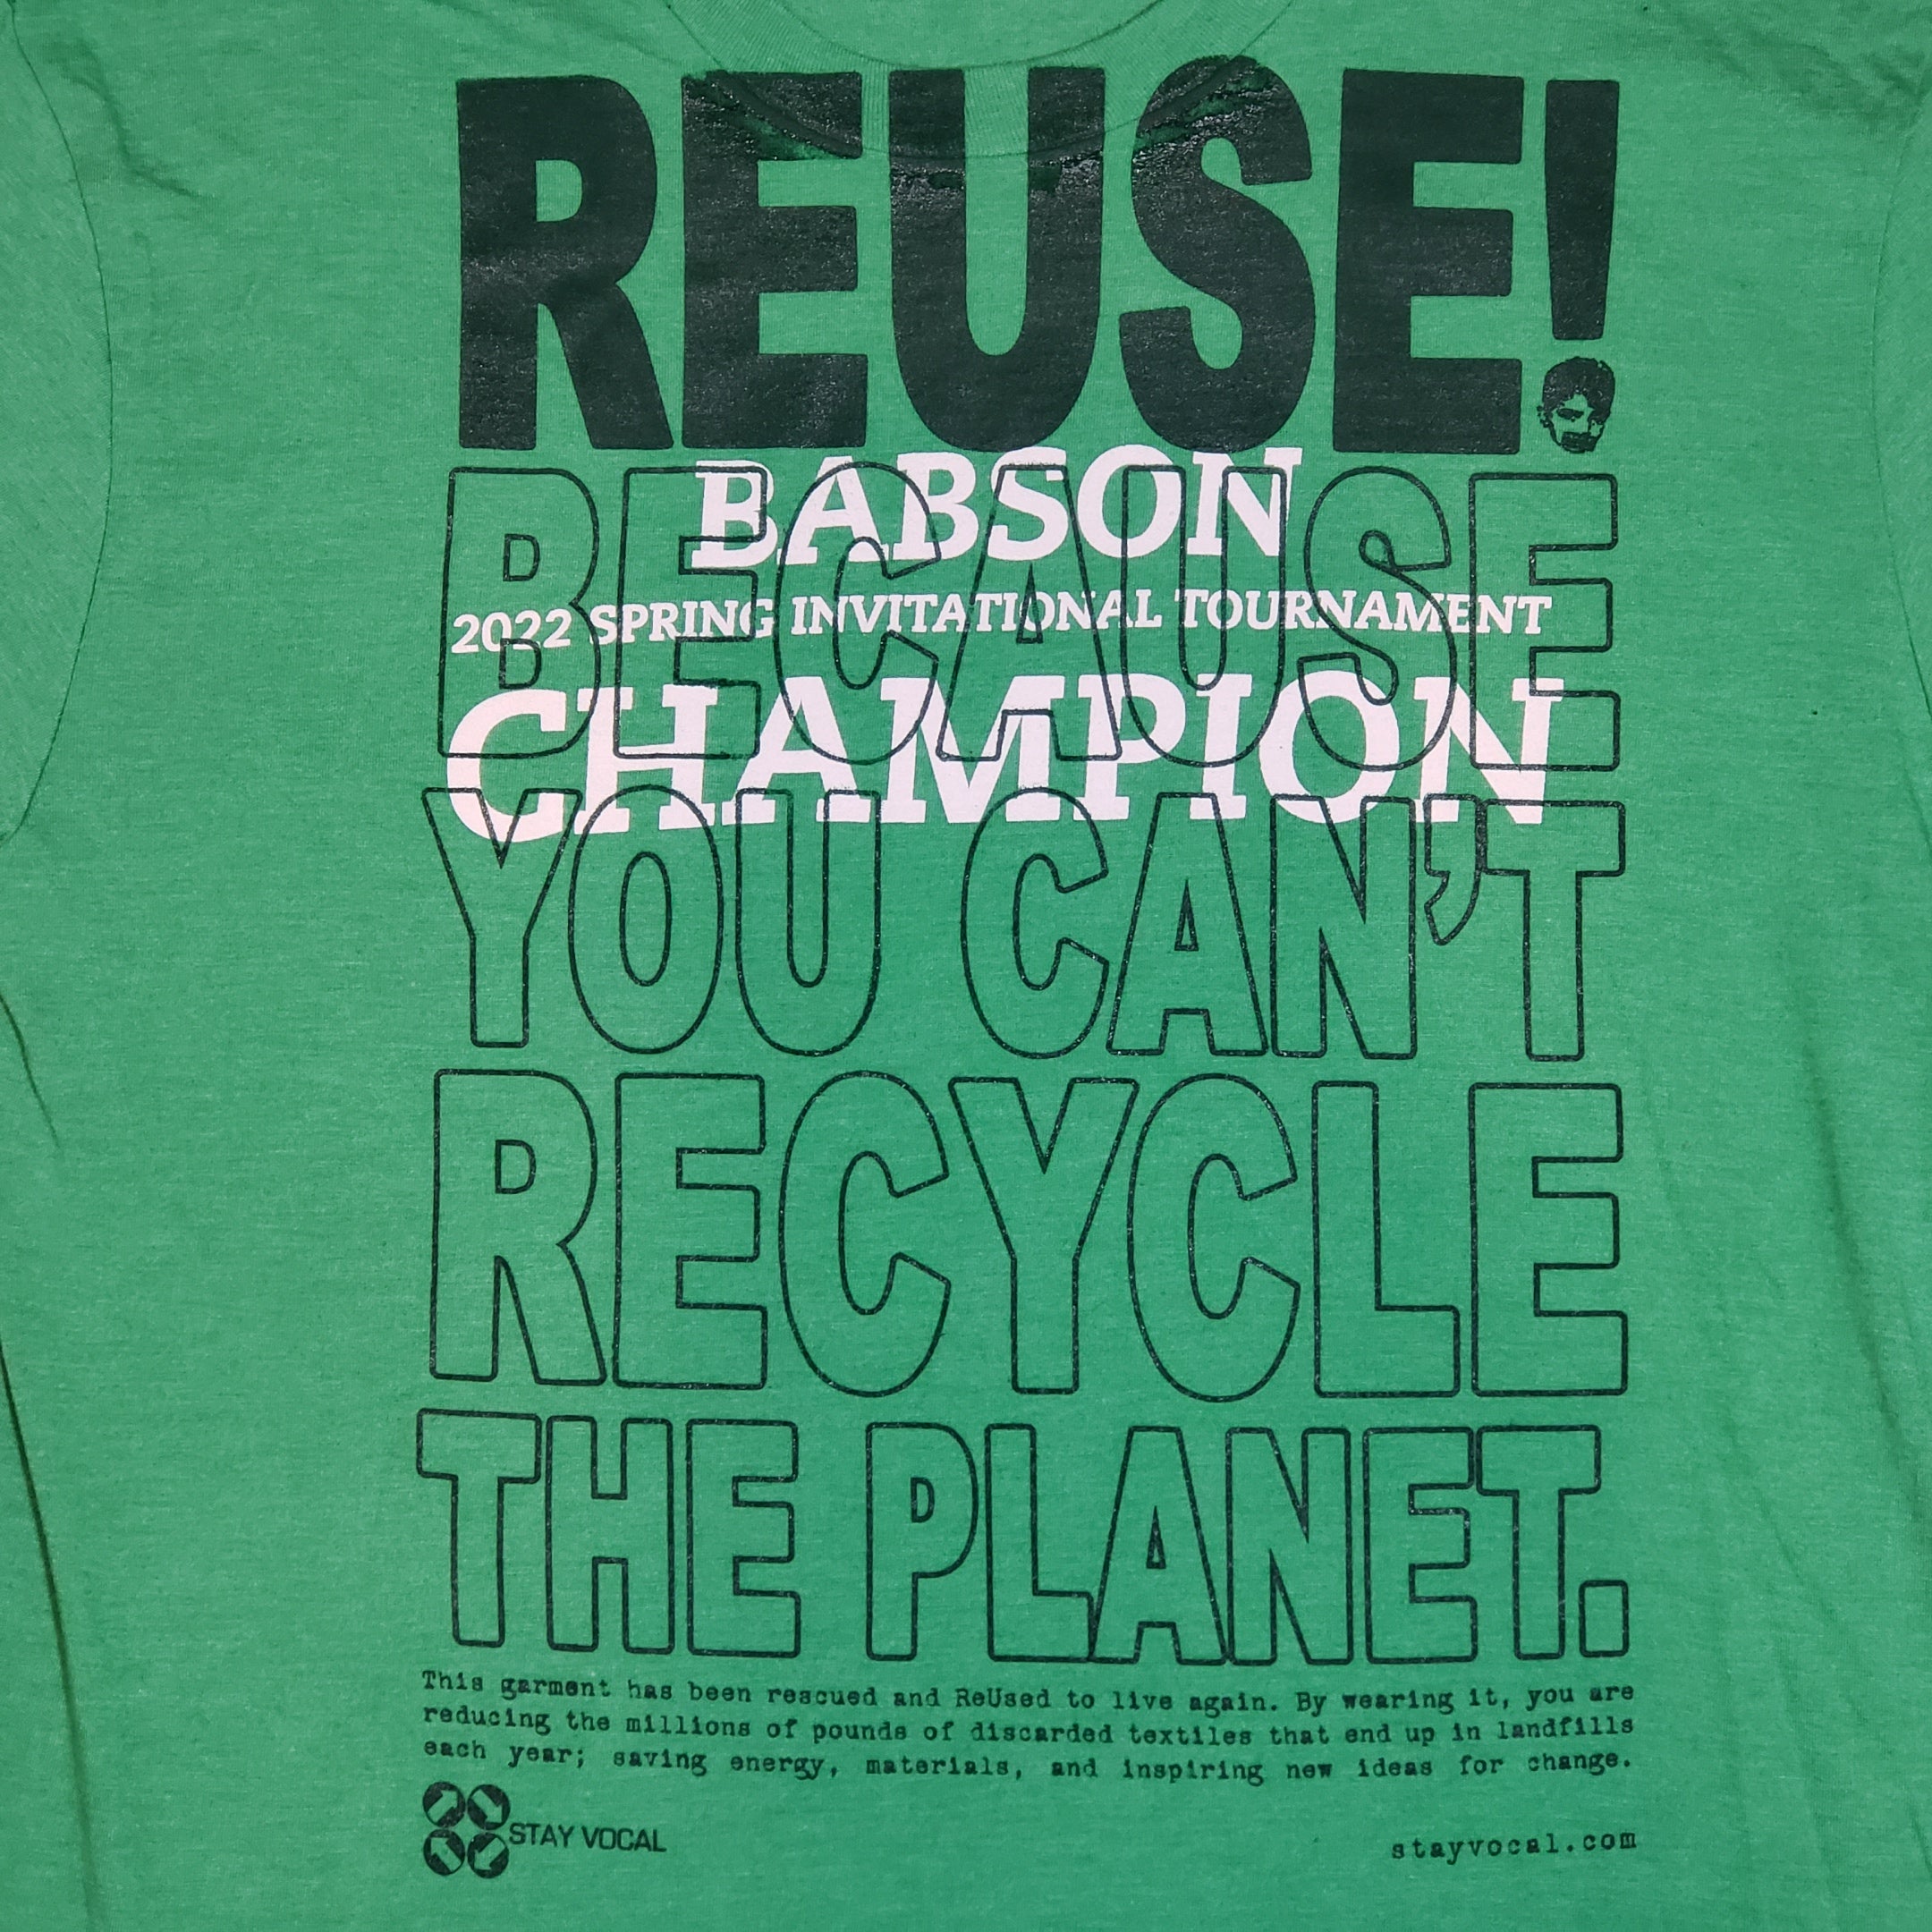 One of a Kind (Men's S) REUSE! Babson College Champion T-Shirt